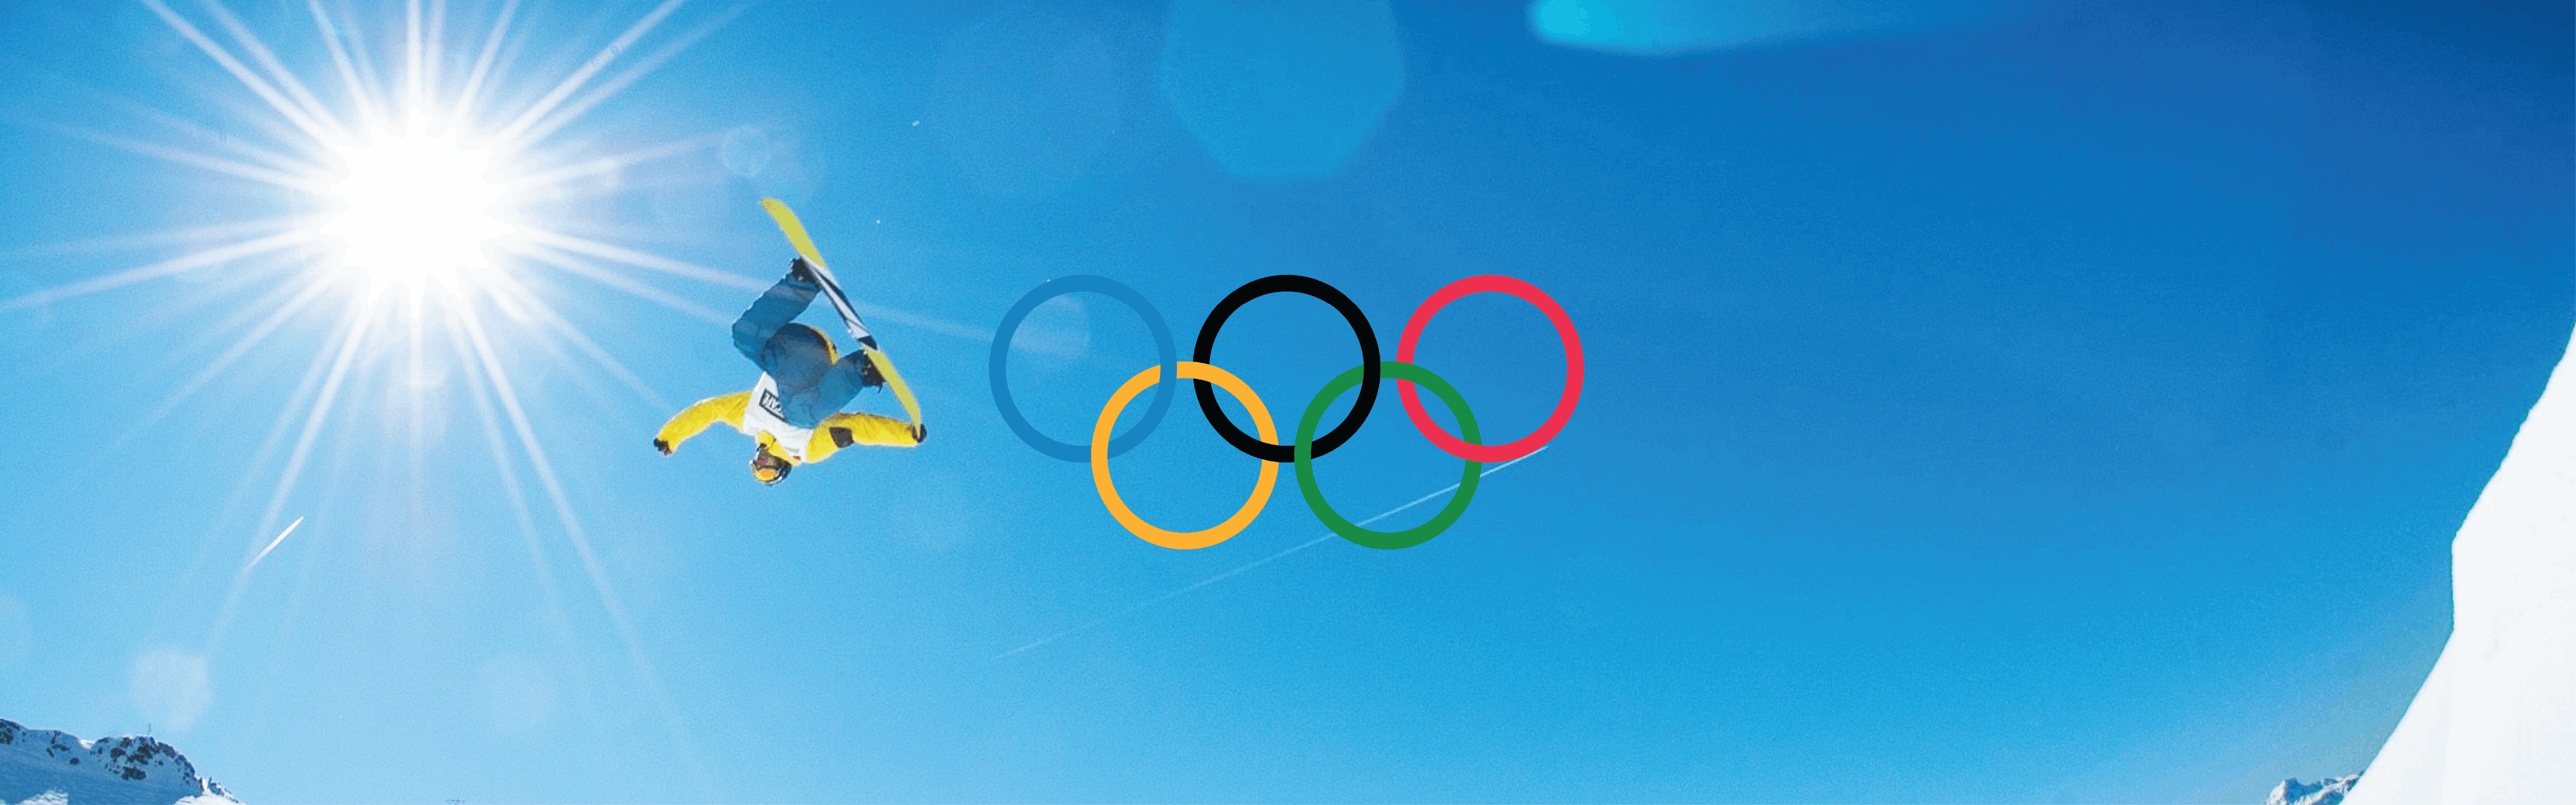 A snowboarder jumps upside down and grabs his board on a blue-sky, sunny day. The Olympic rings are added on top. 